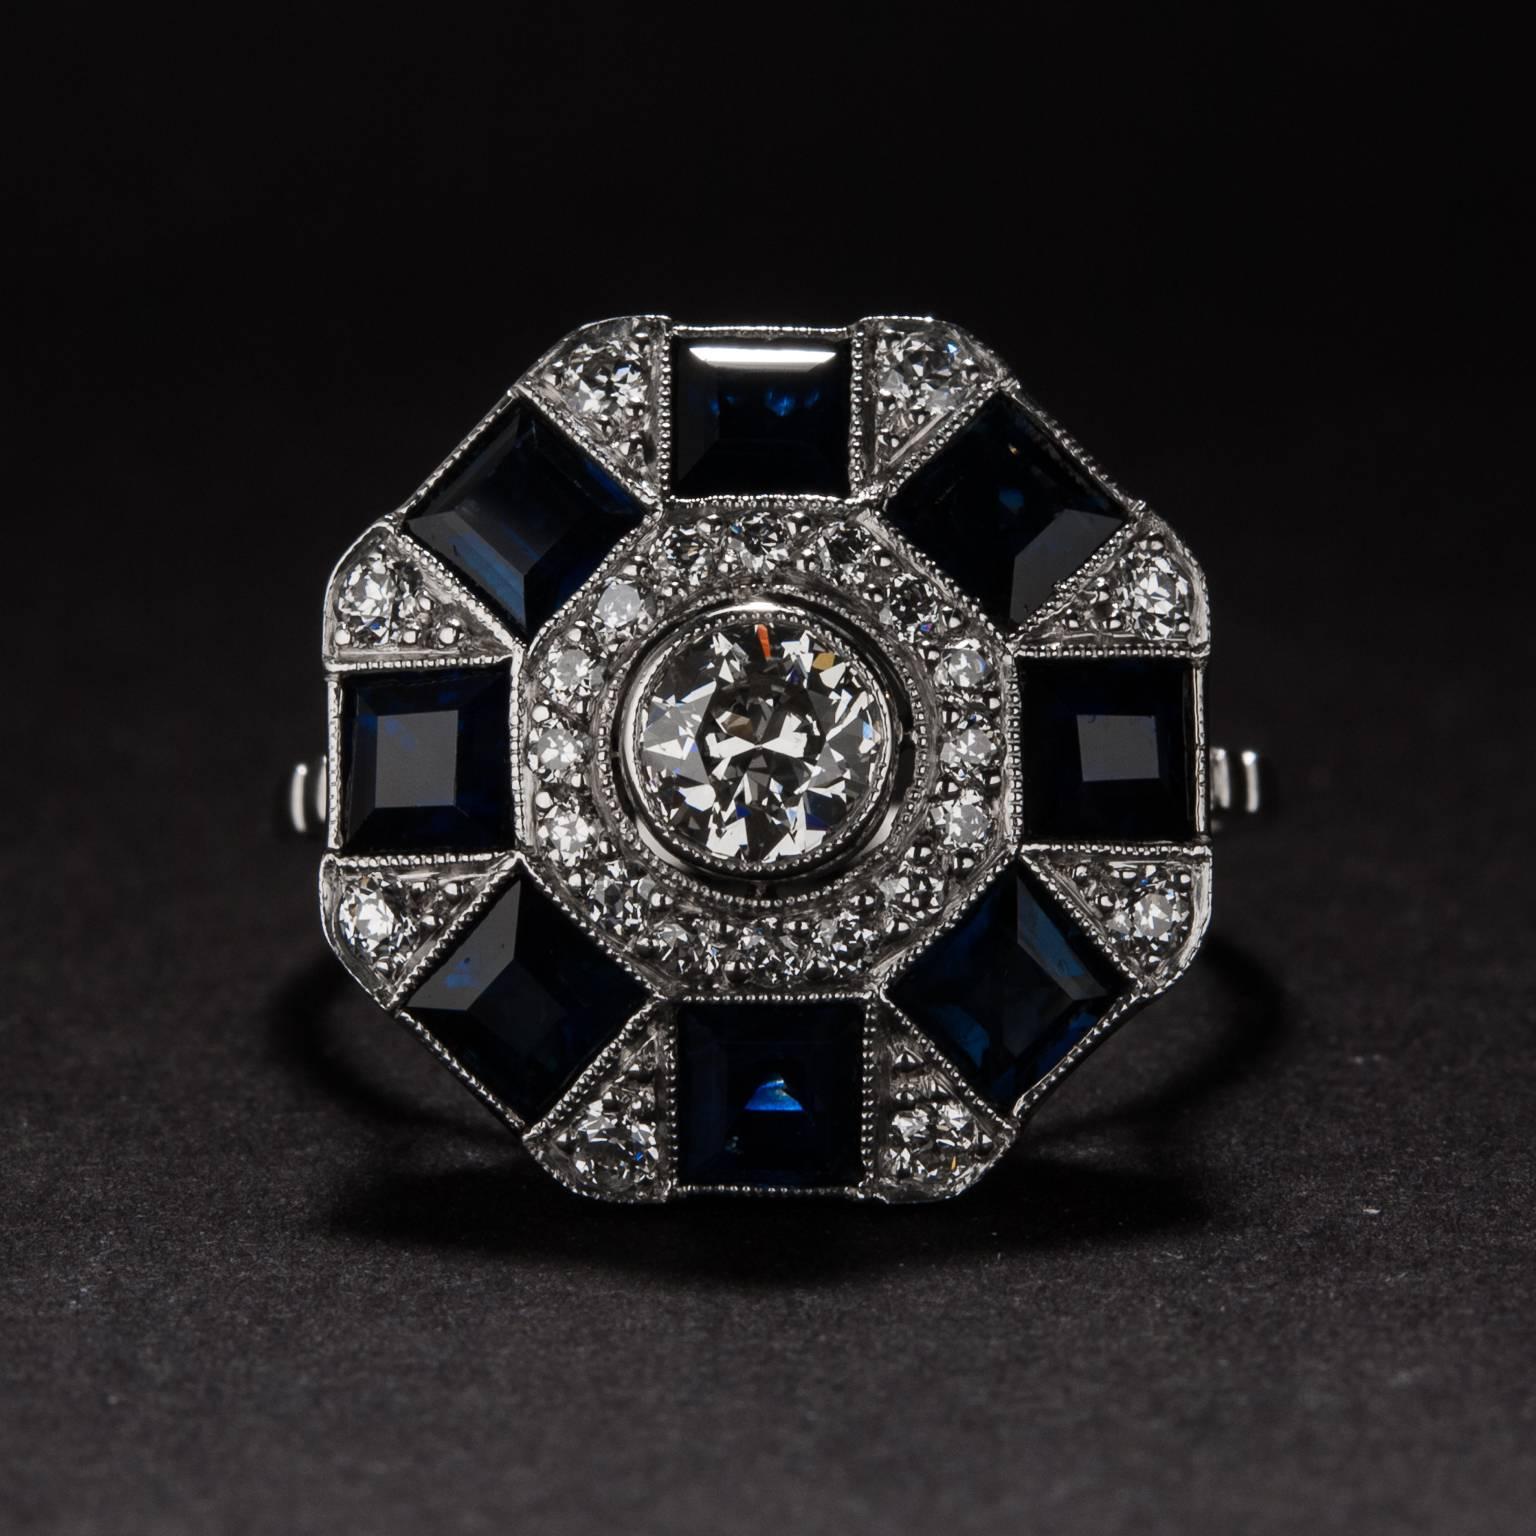 The lovely ring has a .38 carat center diamond and 8 sapphires for a total of 2.40 carats. The beautiful platinum mounting features an additional .40 total carats of diamond. 

This ring is currently size 7.